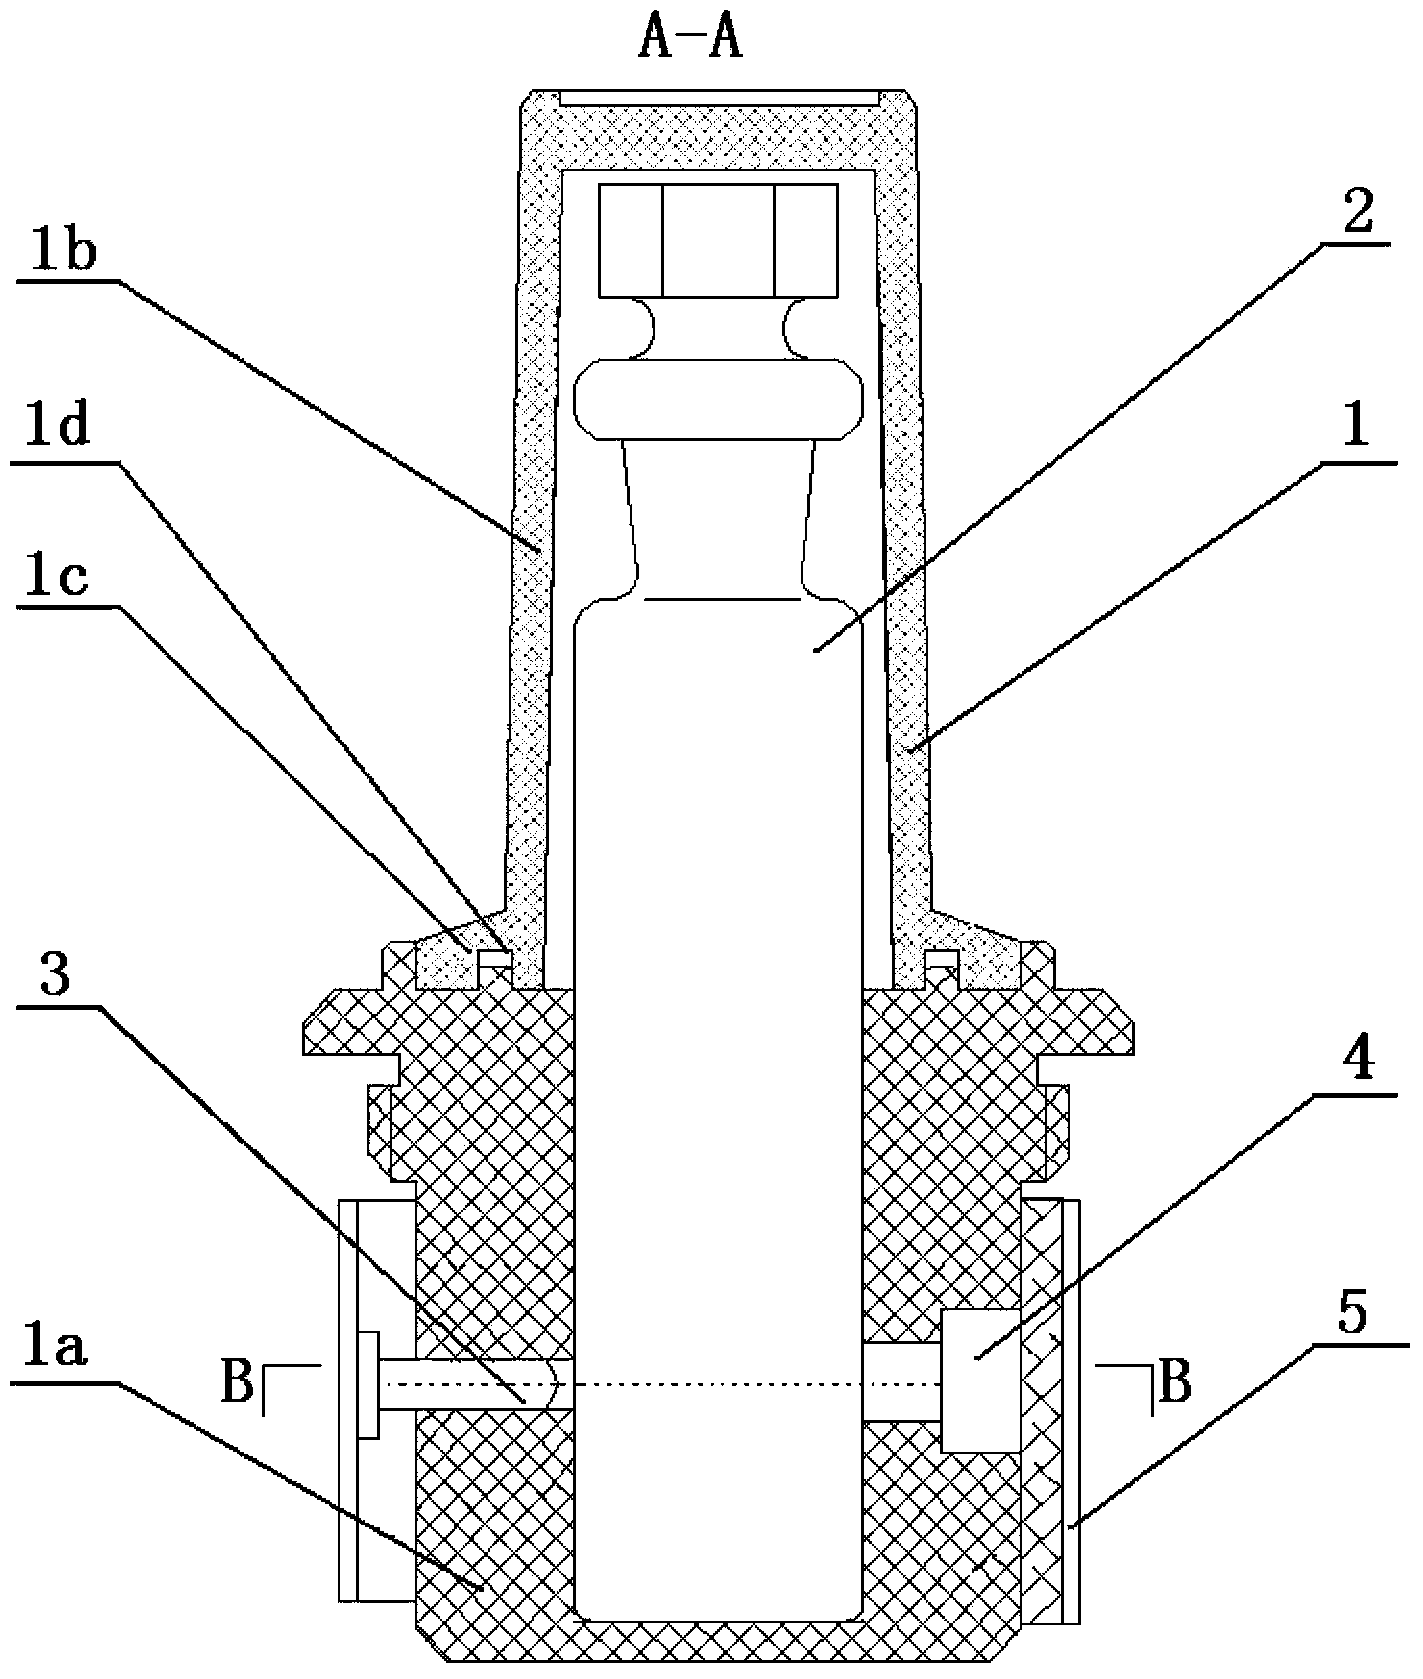 Spectrophotometric detector for detecting methanal and ammonia in air